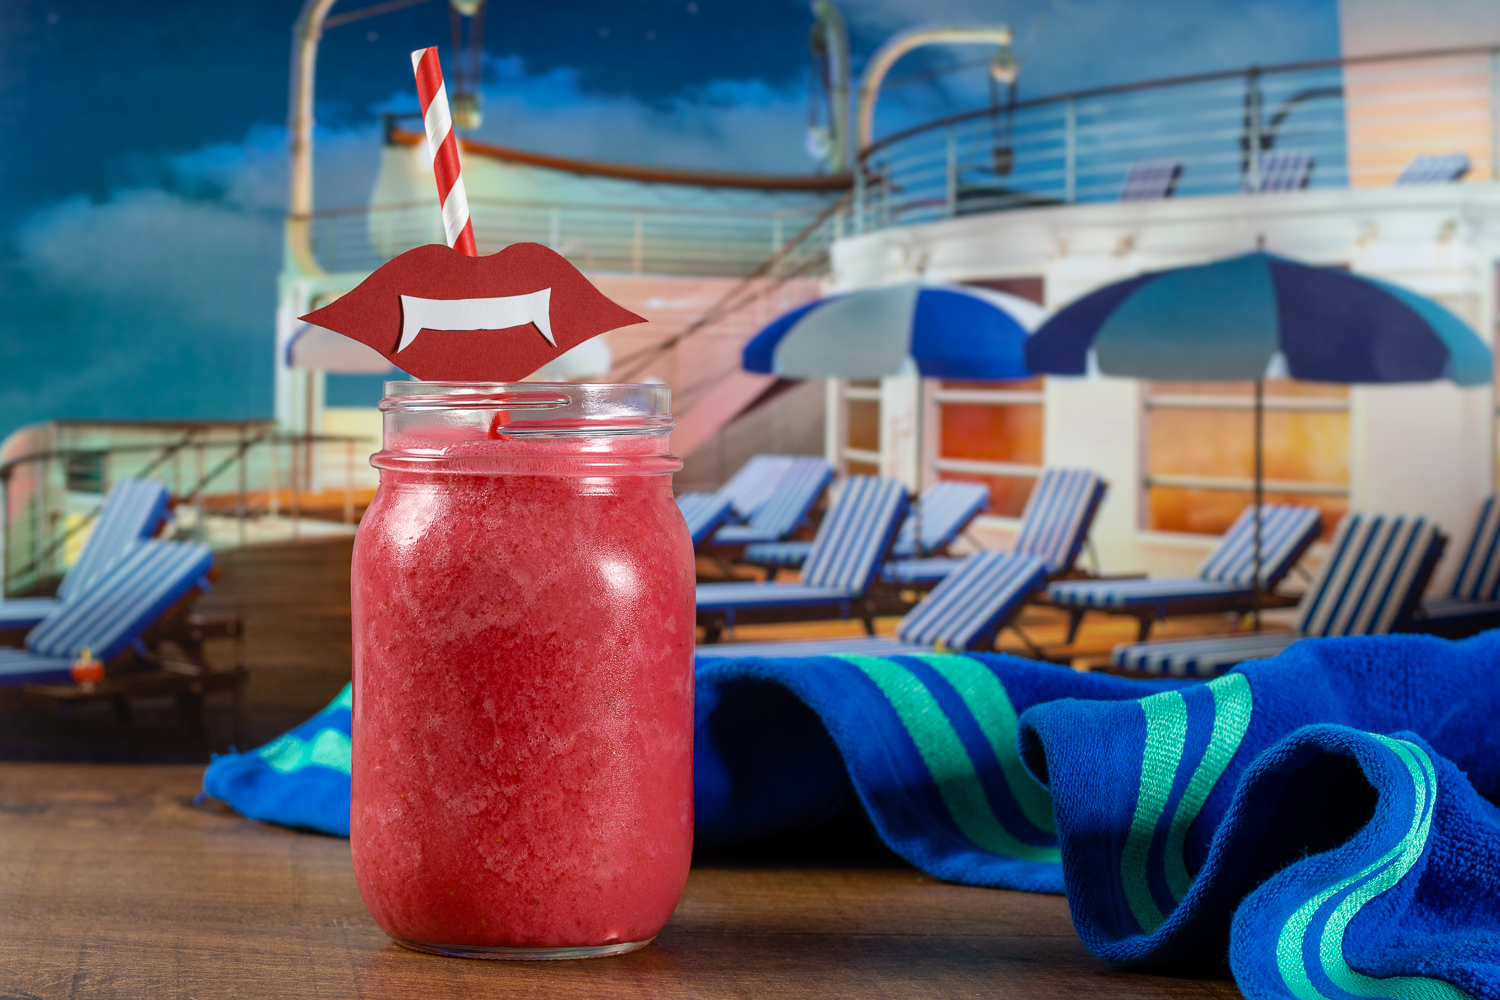 Halloween Recipes | Smoothie Recipes | Hotel Transylvania Recipes | October may not be traditional cruise season but Drac, Mavis, and crew are enjoying one in Hotel Transylvania 3! Live the cruise life at home with Drac's Spooky Smoothie! [Sponsored] 2geekswhoeat.com